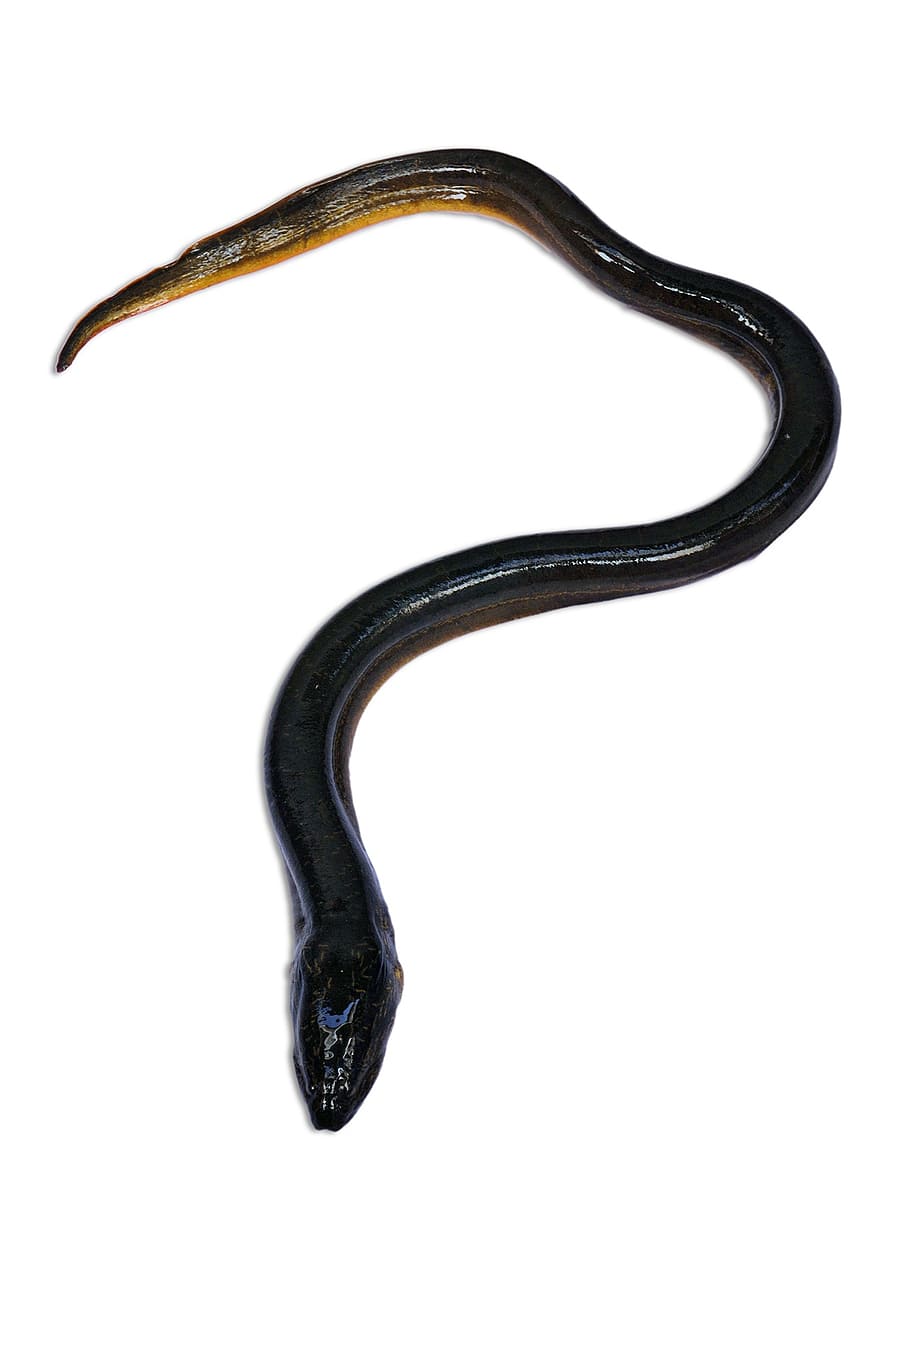 black snake, eel, fish, fresh water, animals, studio shot, white background, indoors, single object, cut out